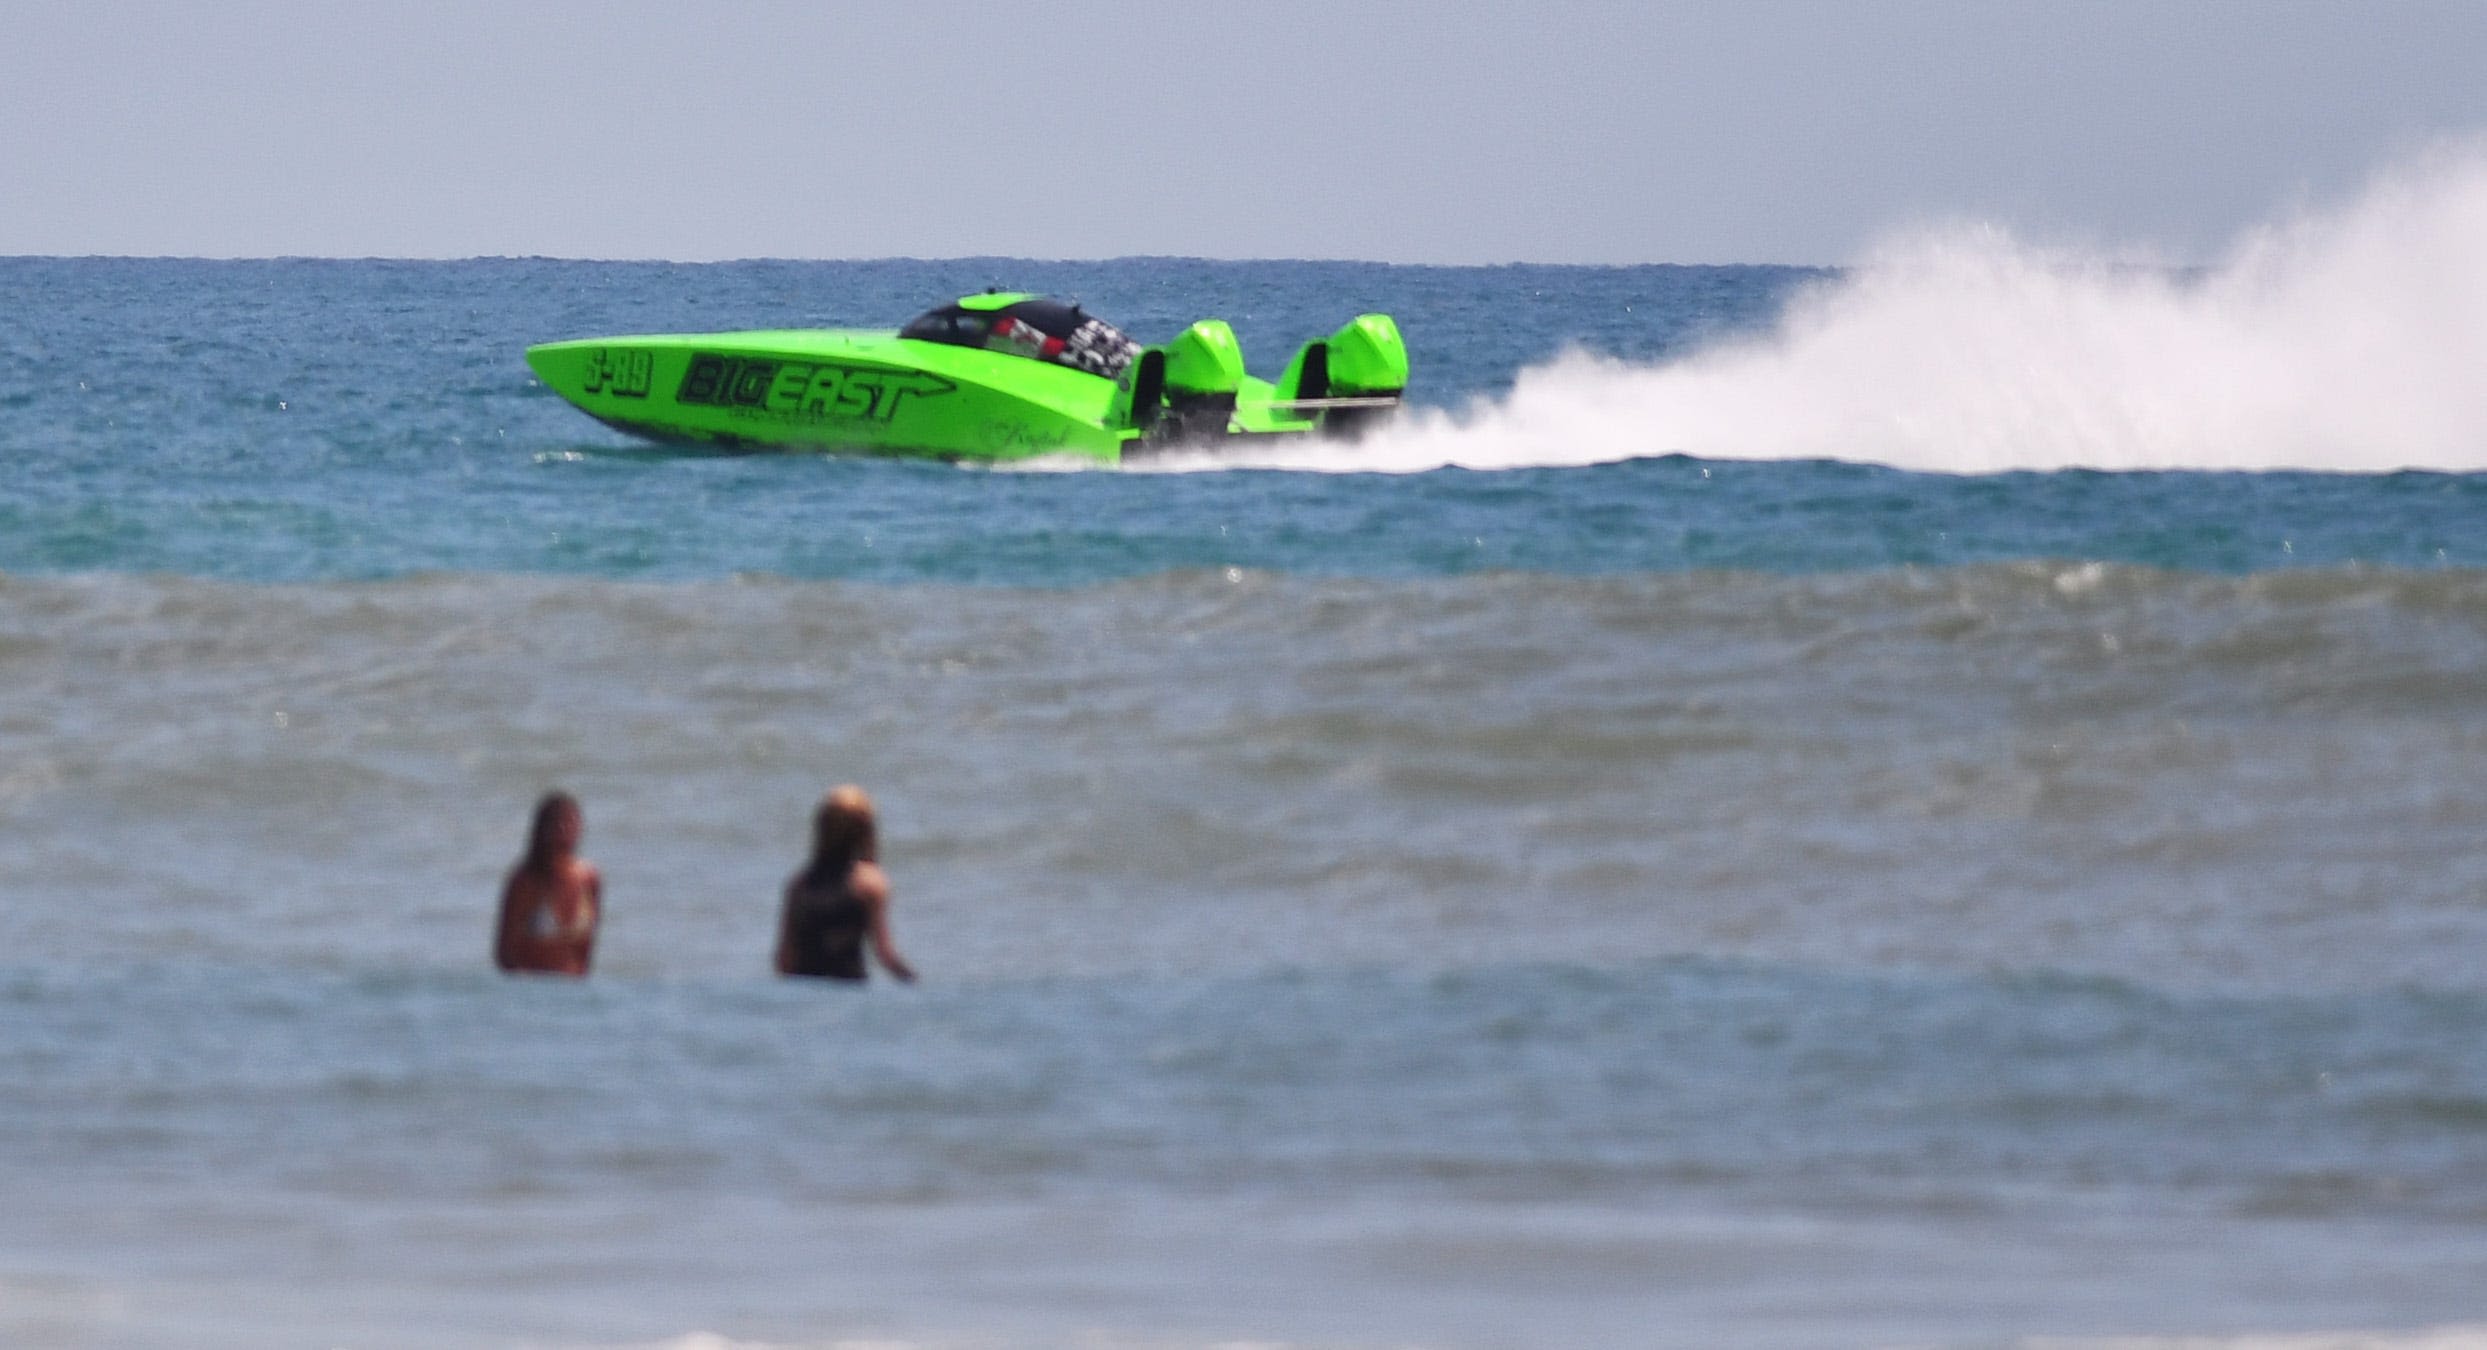 50+ best things to do in Brevard in May, from free movies to speed boat races